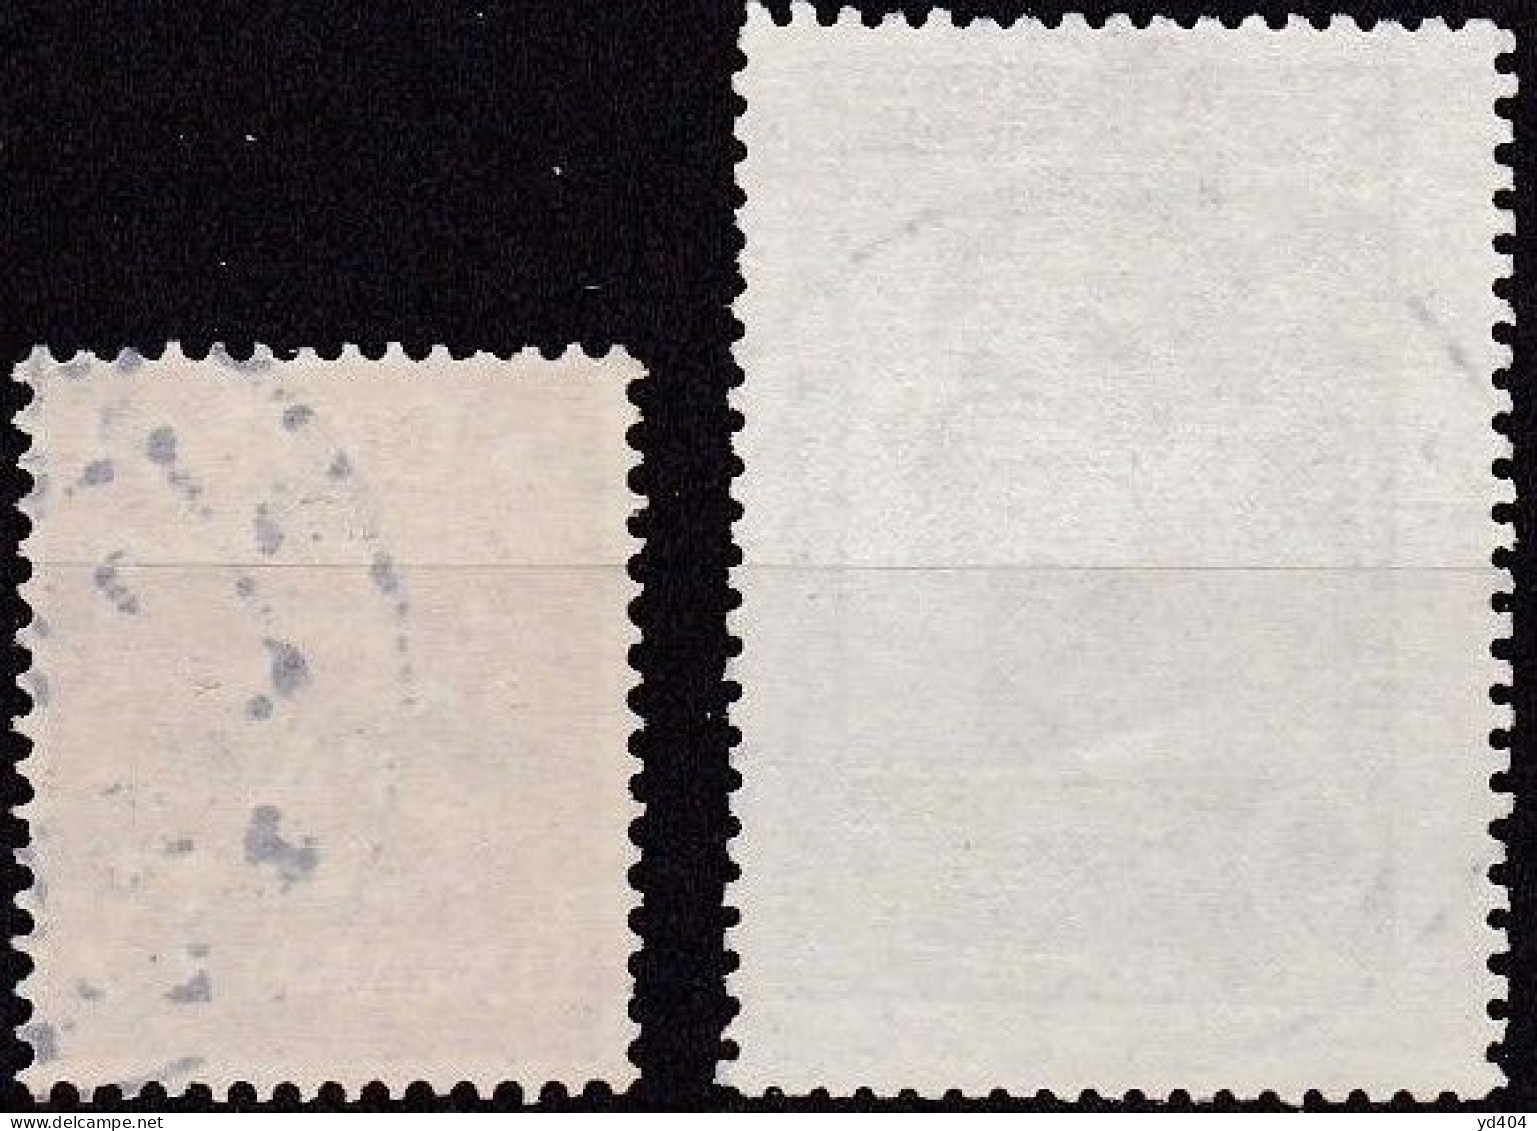 FI053 – FINLANDE – FINLAND – 1937 – MANNERHEIM & CURRENT TYPE – Y&T 194/5 USED - Used Stamps